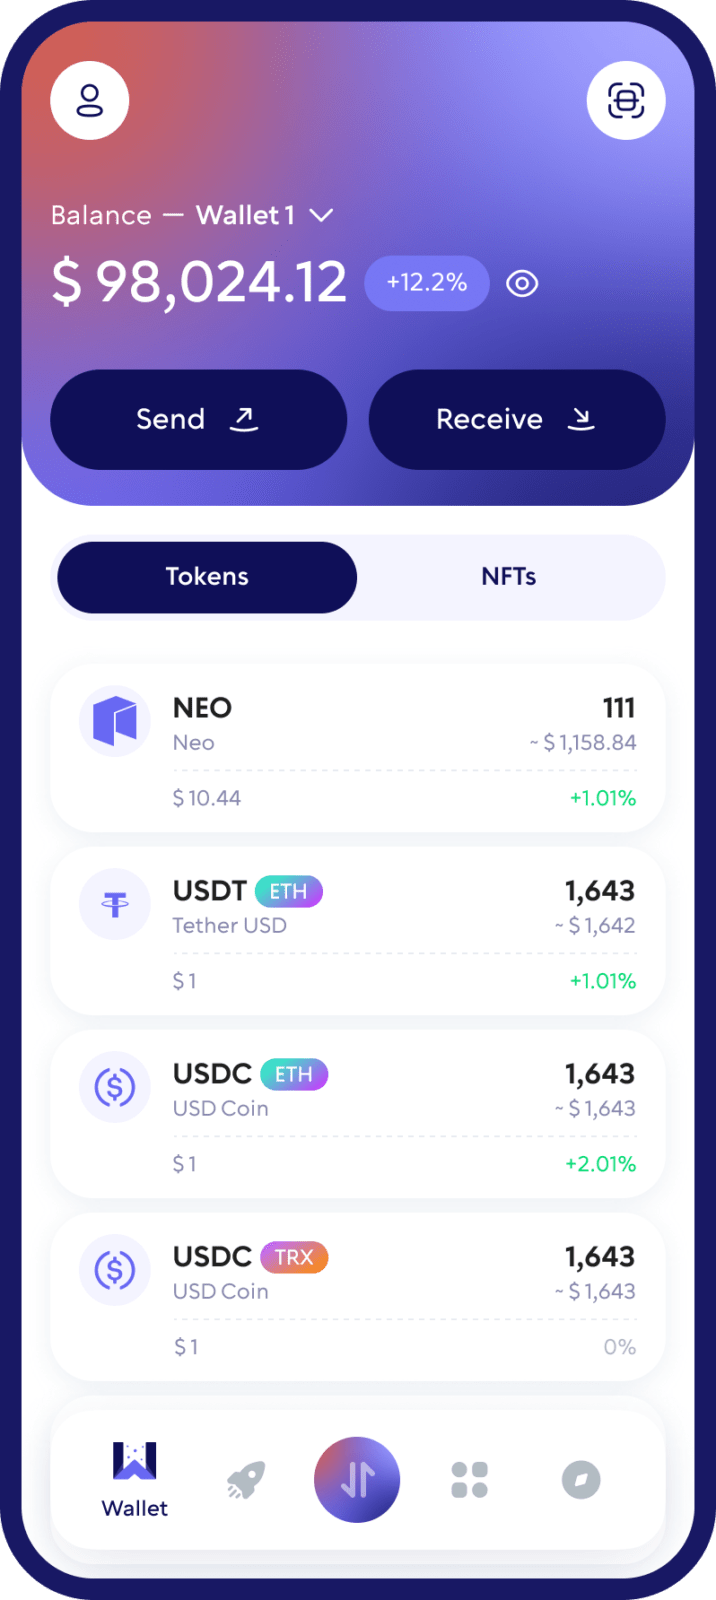 Neo (NEO) Cryptocurrency Wallet Walletverse